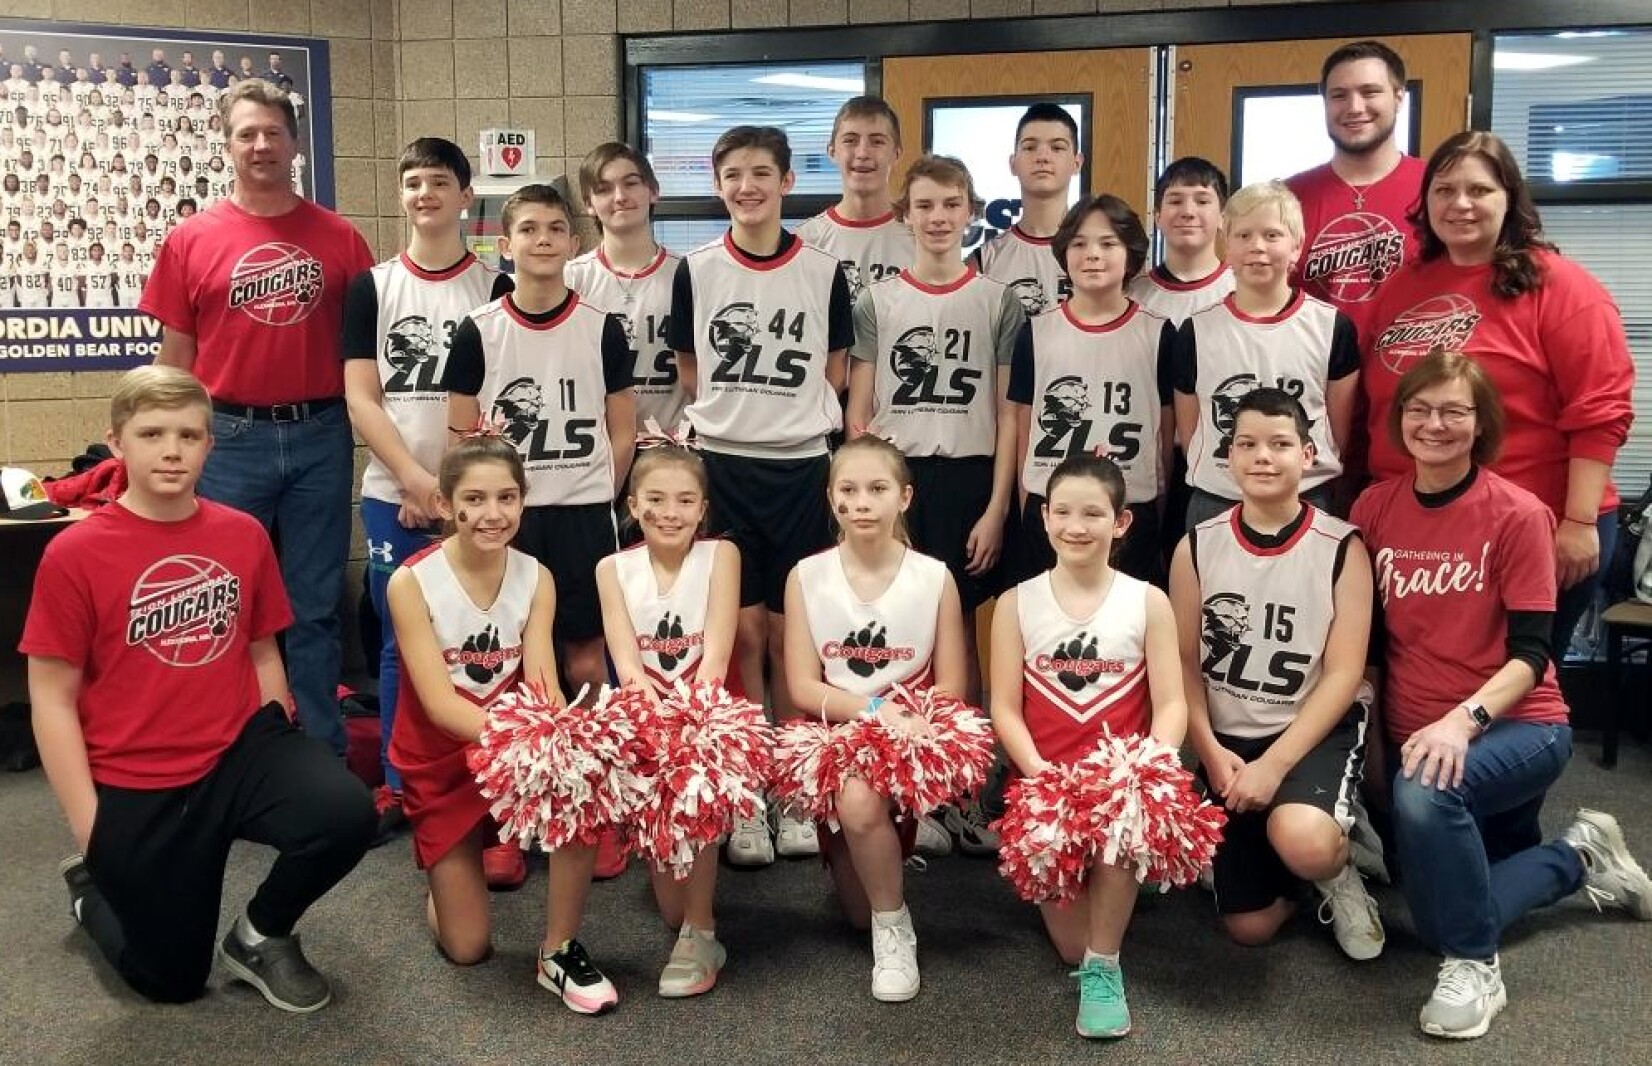  Zion Lutheran School 7th-8th grade team set to play in a national basketball tournament 